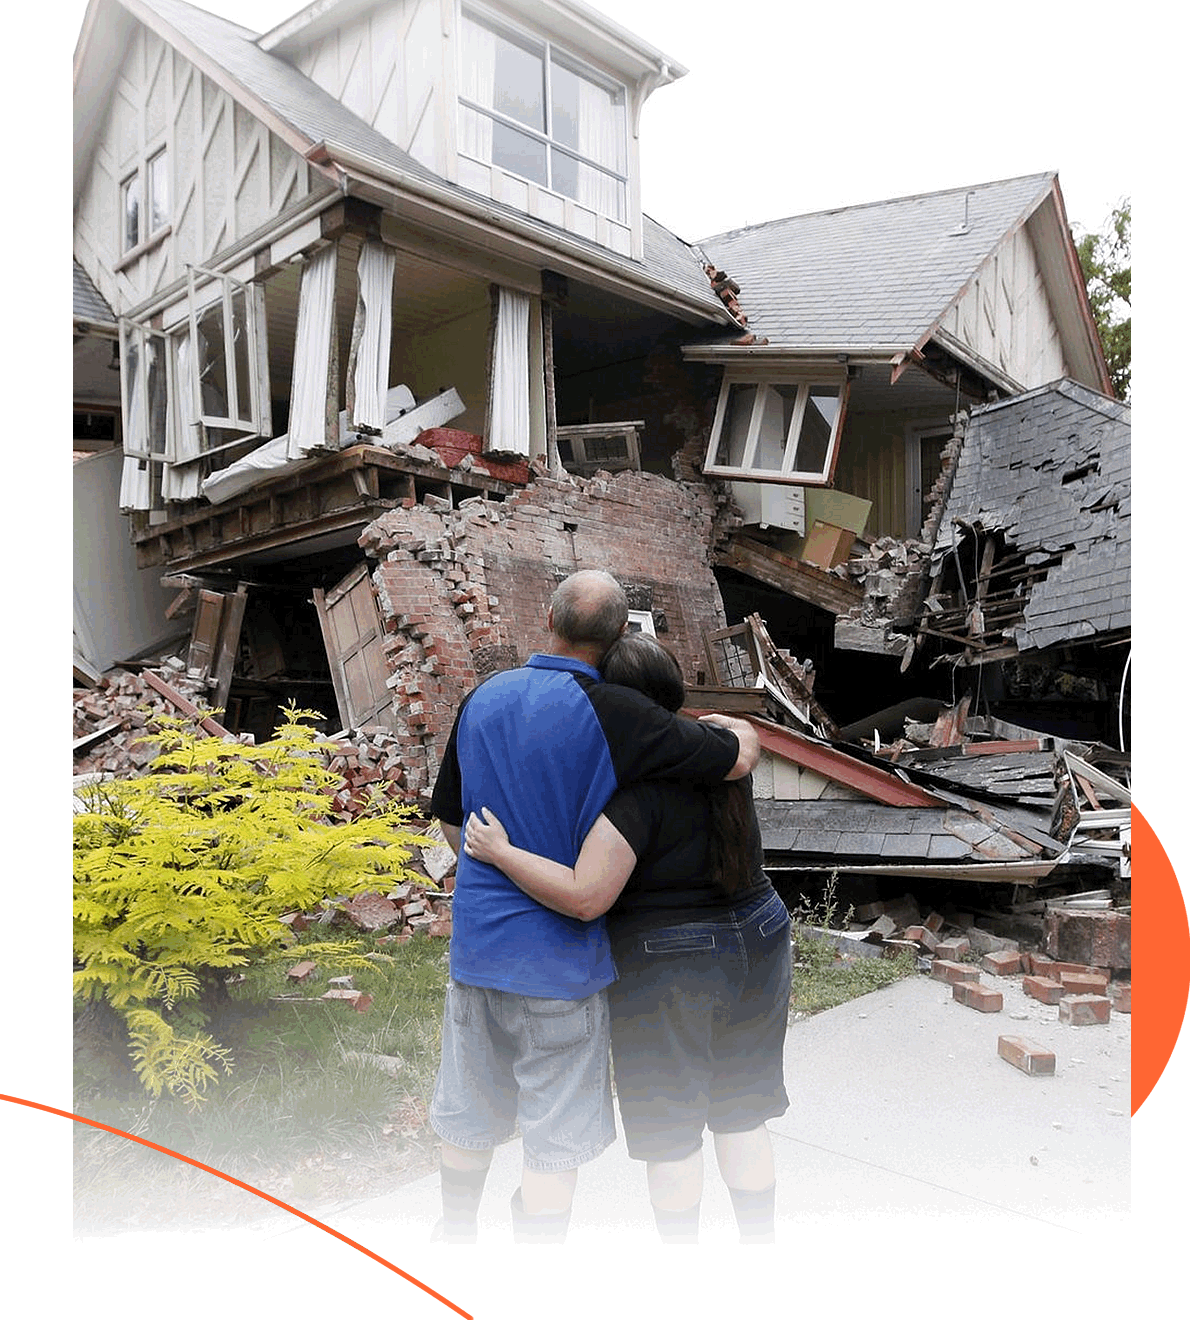 Earthquake insurance - Universal Insurance Services - We are Insurance ...